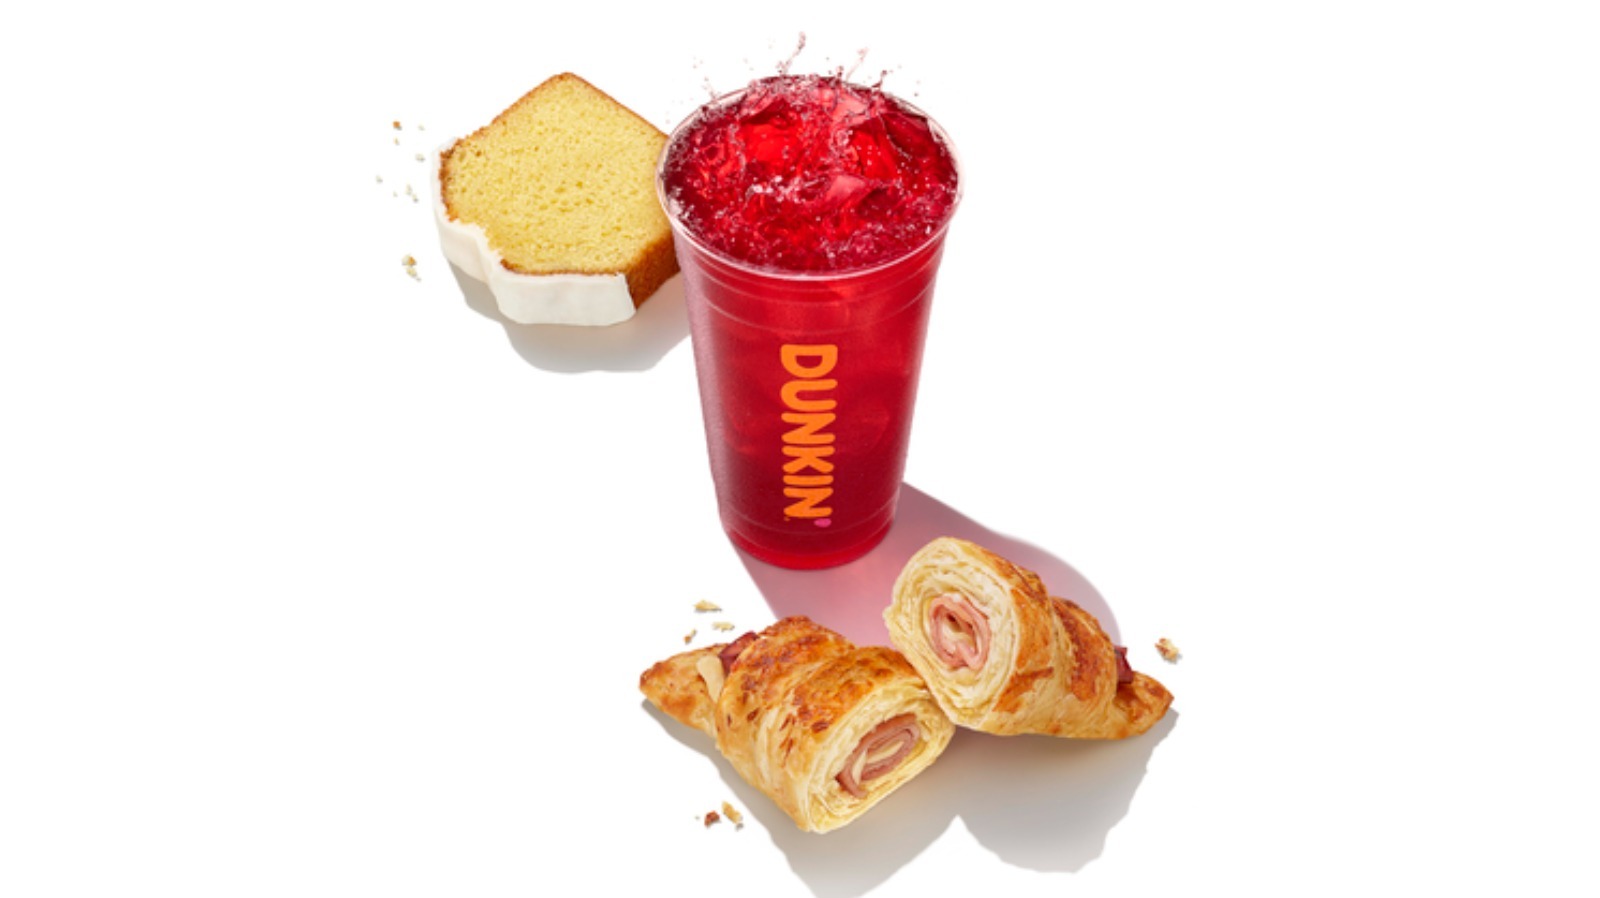 Dunkin’s New Raspberry Watermelon Refresher Is Shaking Up Summer – The Daily Meal